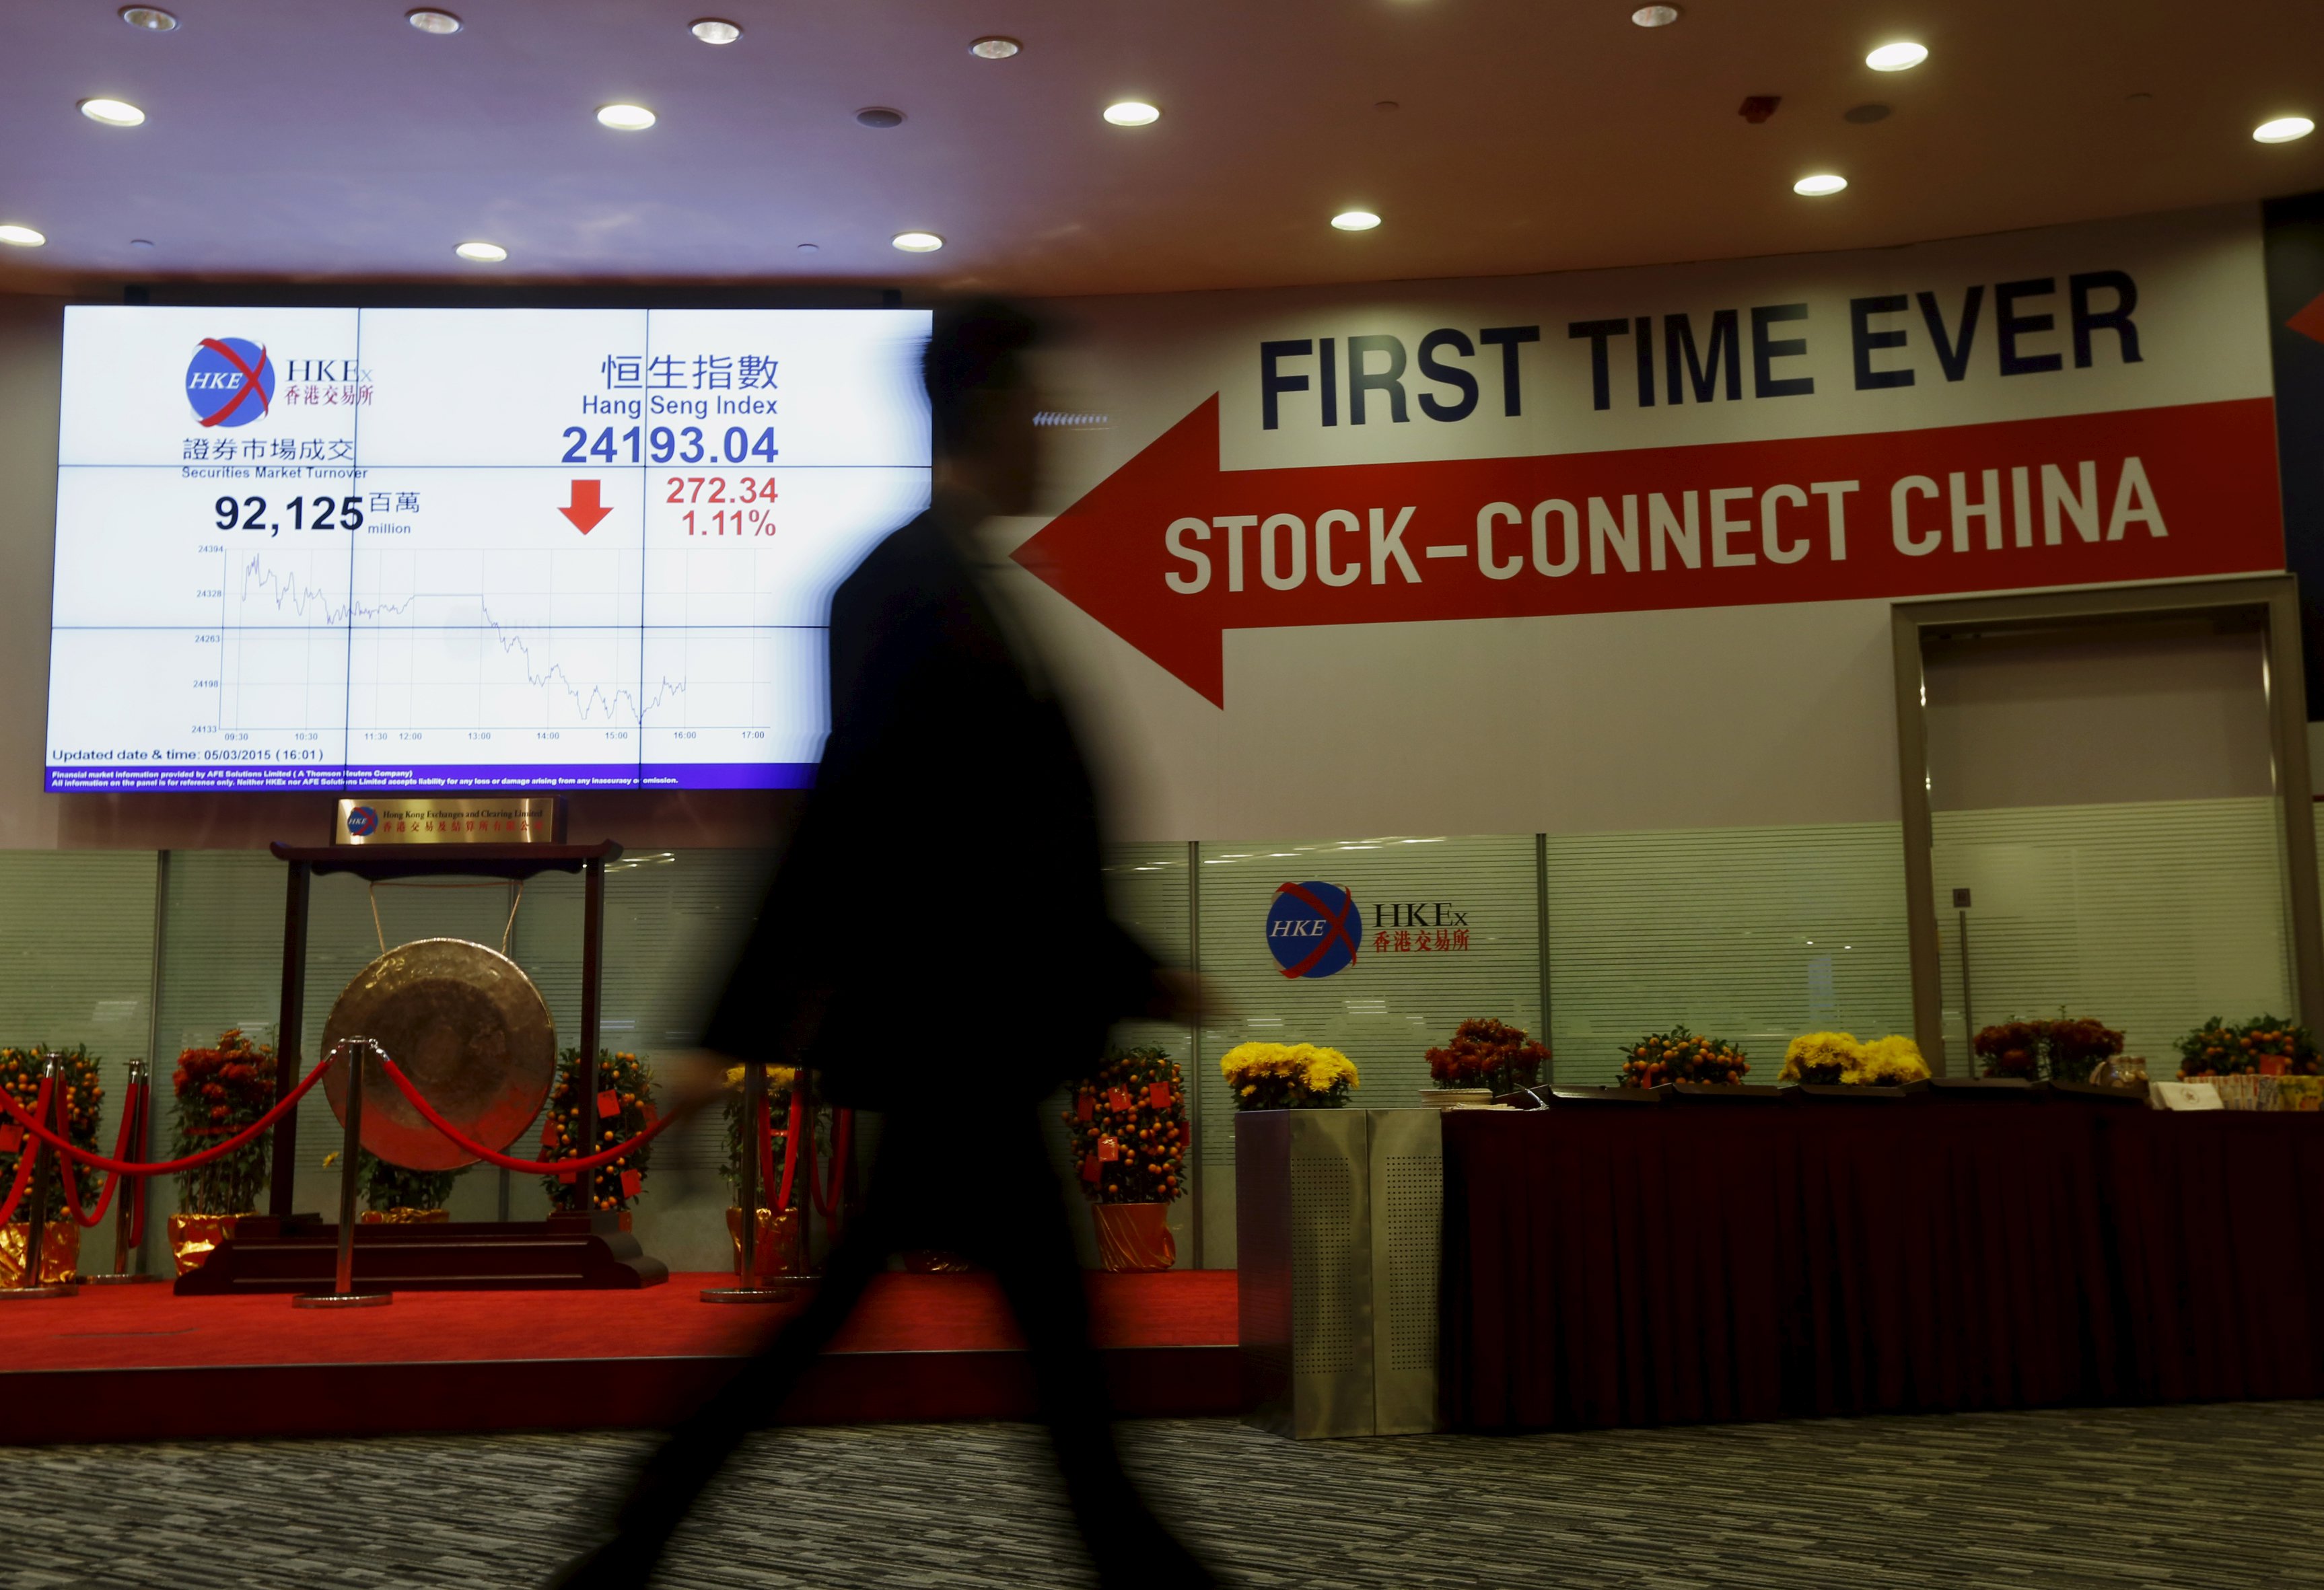 A man walks past a panel displaying the closing blue chip Hang Seng Index and a banner on "Shanghai-Hong Kong Stock Connect" inside the Hong Kong Exchange in Hong Kong in this March 5, 2015 file photo. A tepid response from investors to the Hong Kong-Shanghai Stock Connect scheme in its first year has made industry executives sceptical about the success of proposed exchange link-ups and their value in providing equity market access. REUTERS/Bobby Yip/Files